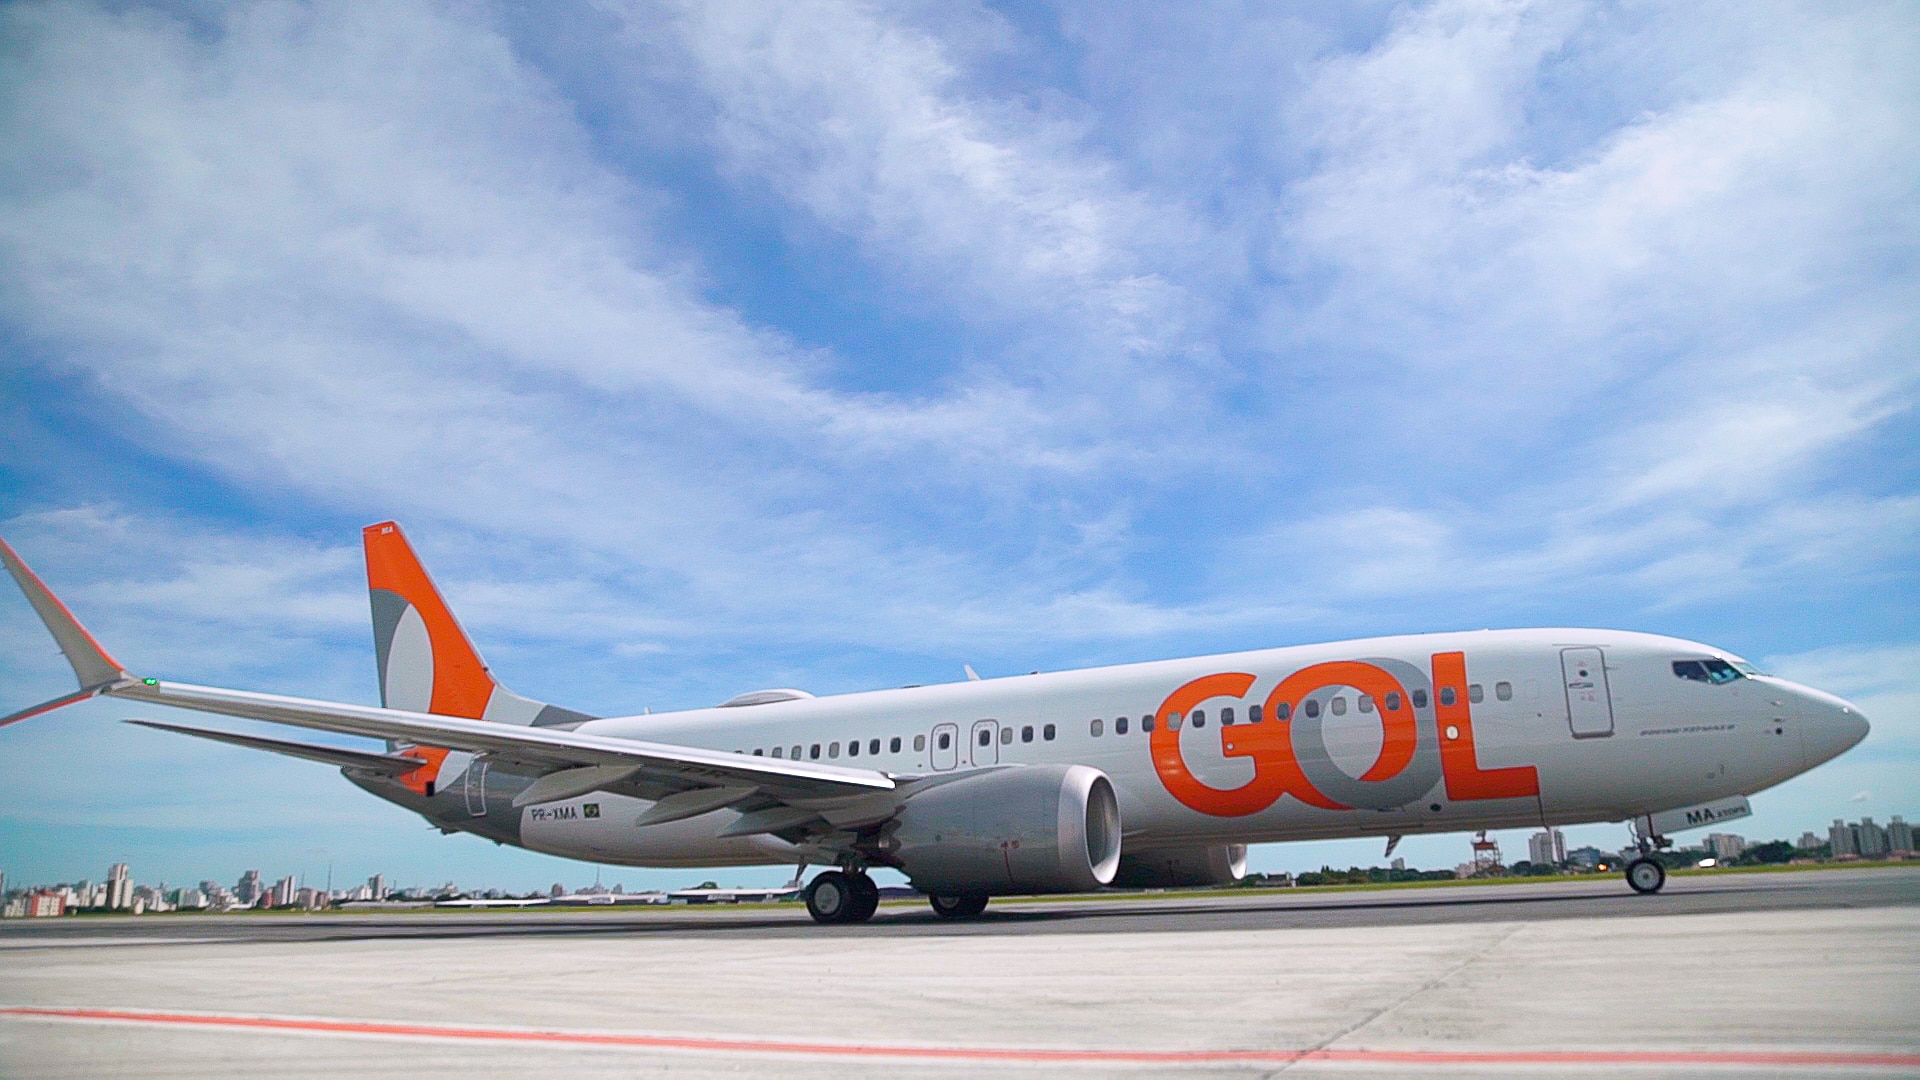 The Securities Exchange Commission Charged slammed GOL Airlines with FCPA norms violation